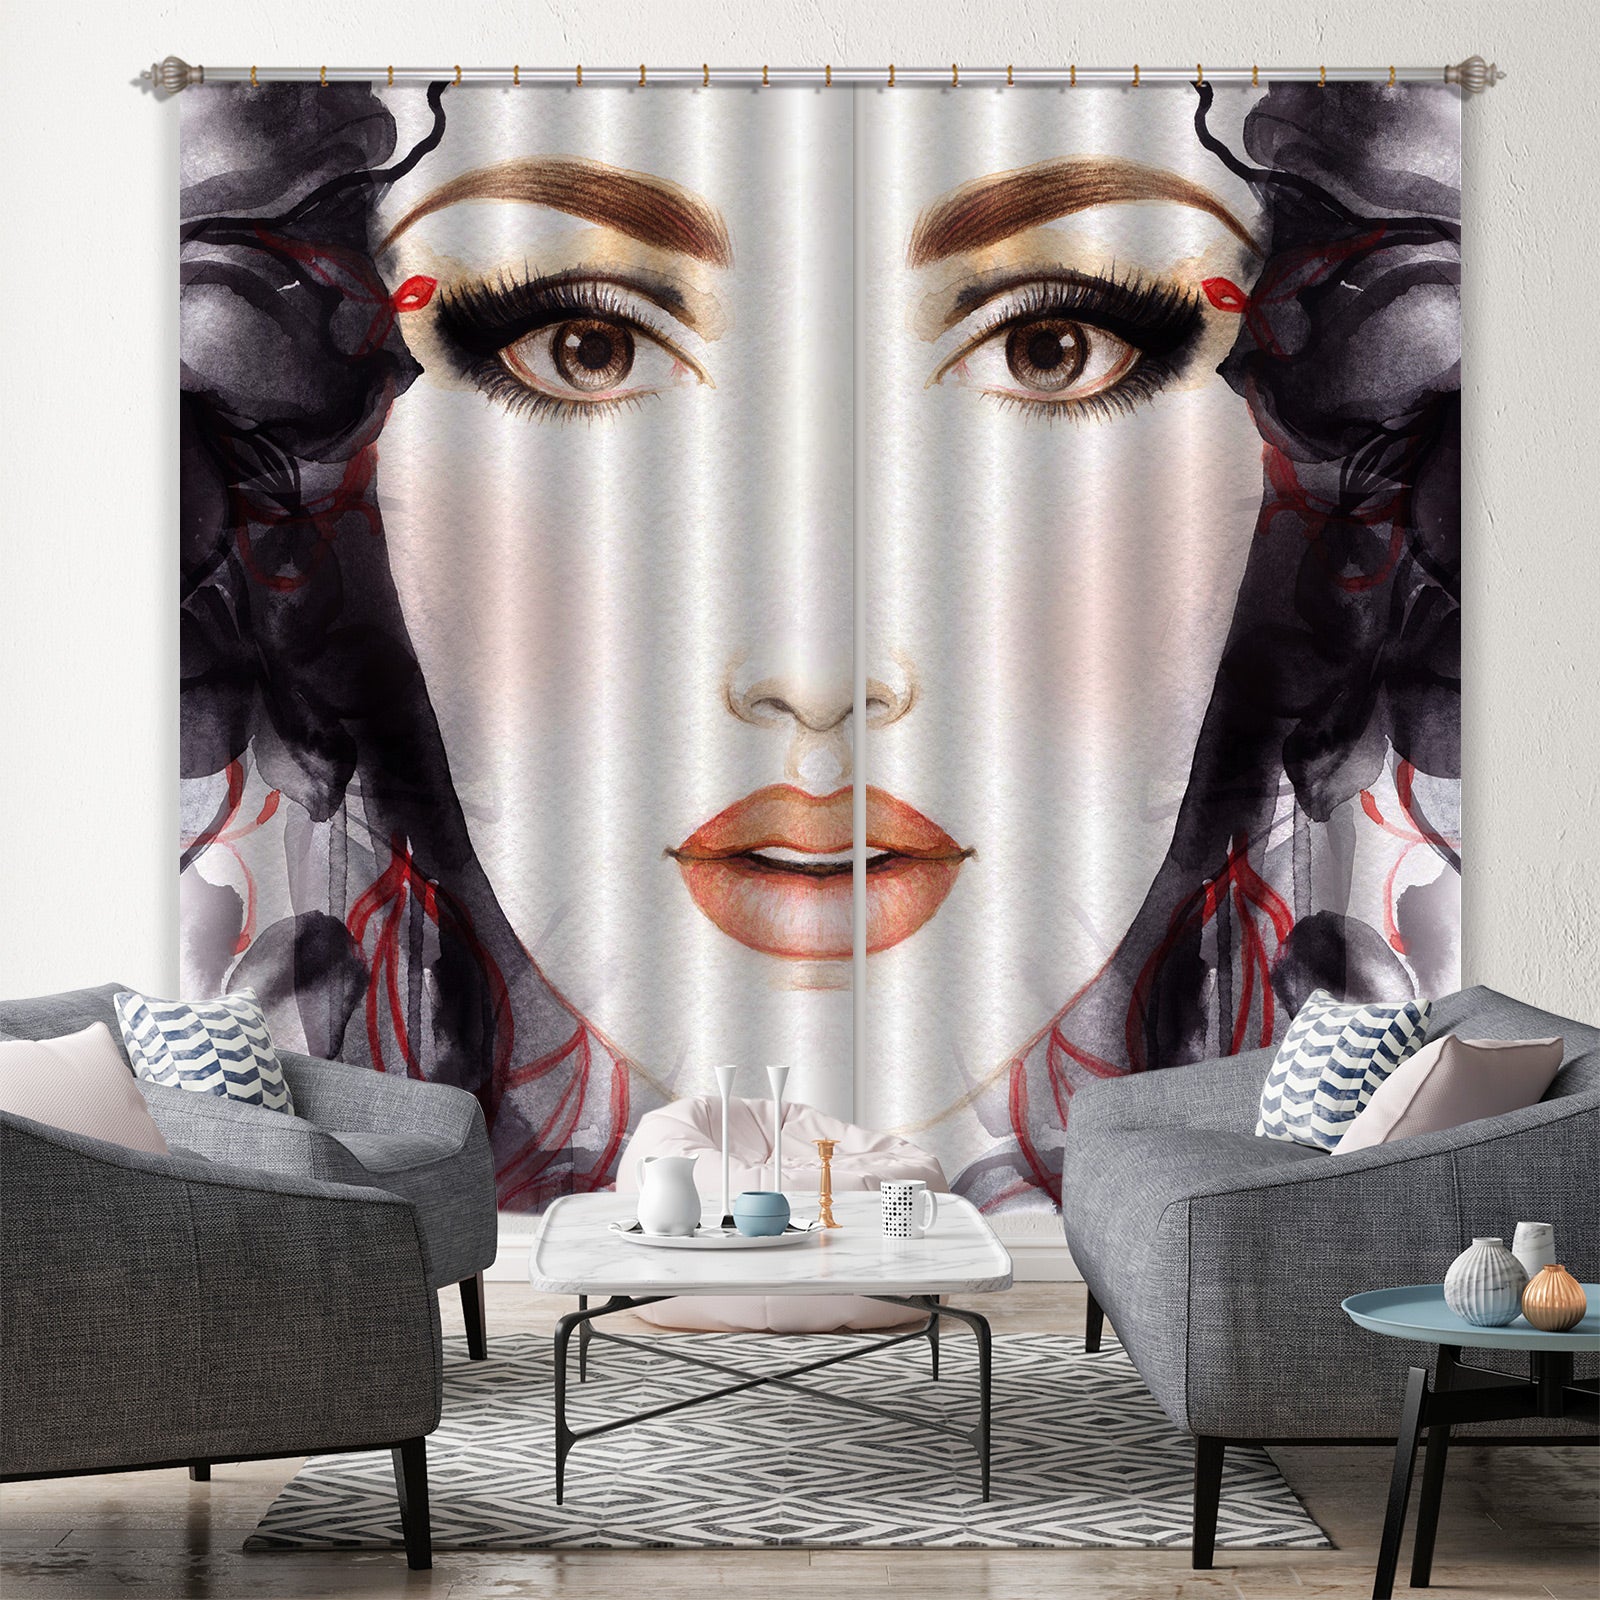 3D Youth Girl 022 Curtains Drapes